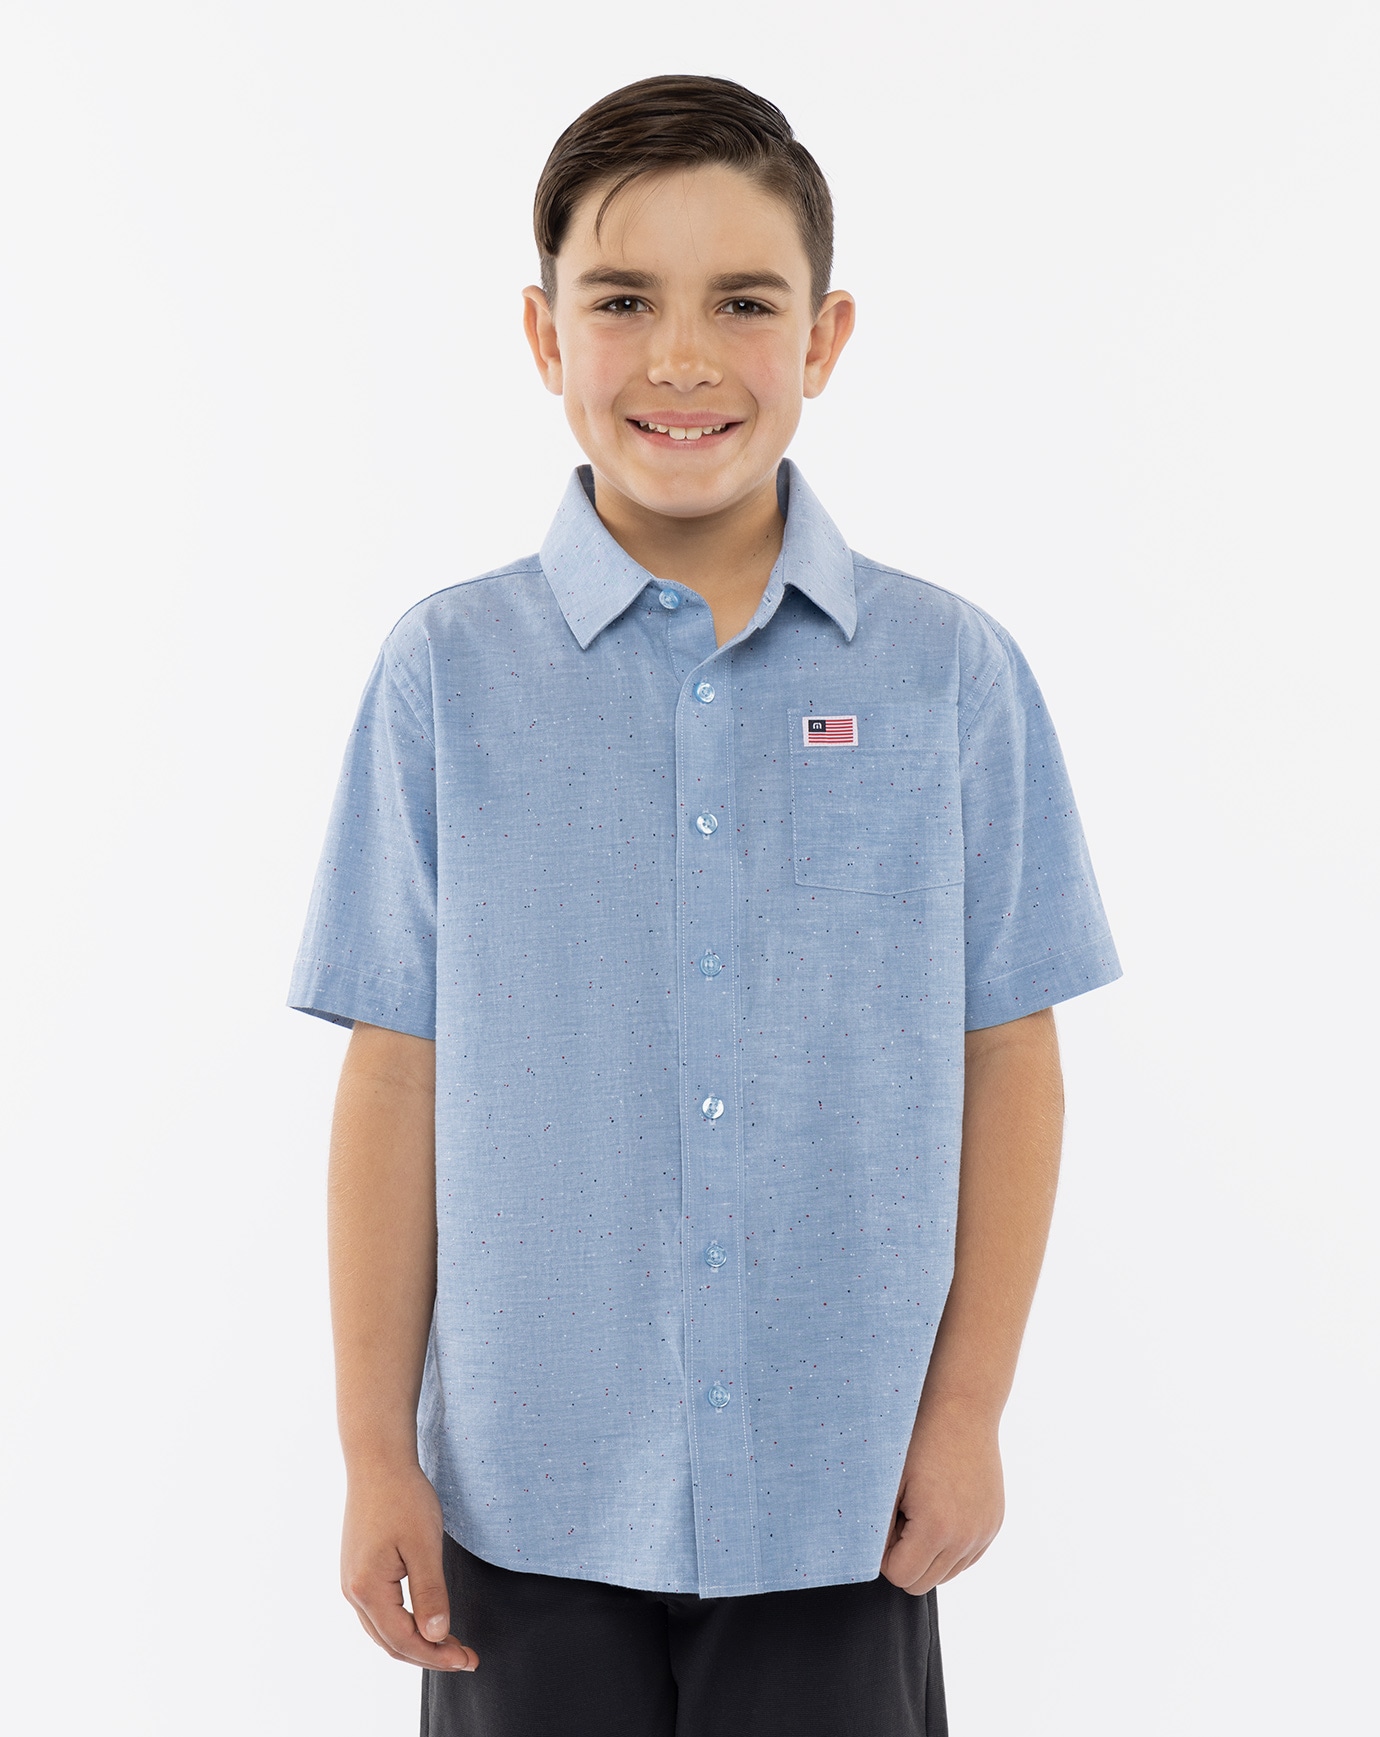 Related Product - EAGLE PRIDE YOUTH BUTTON-UP